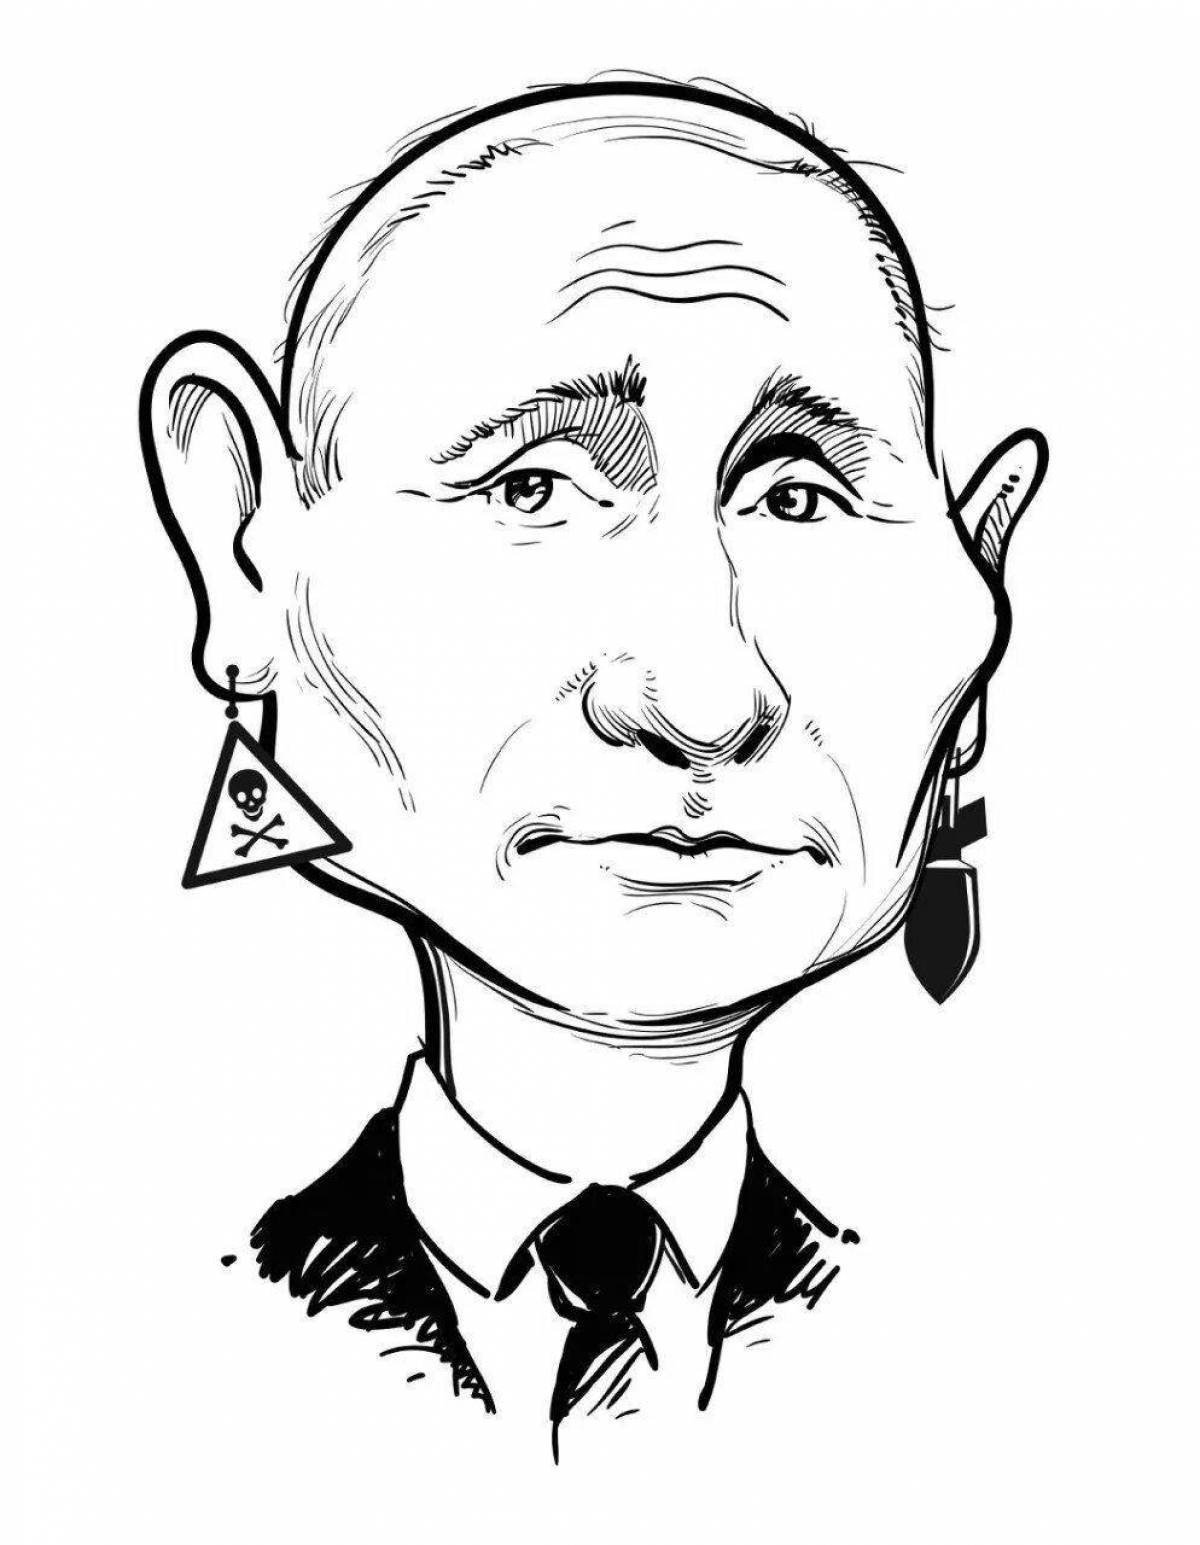 Putin live coloring for kids